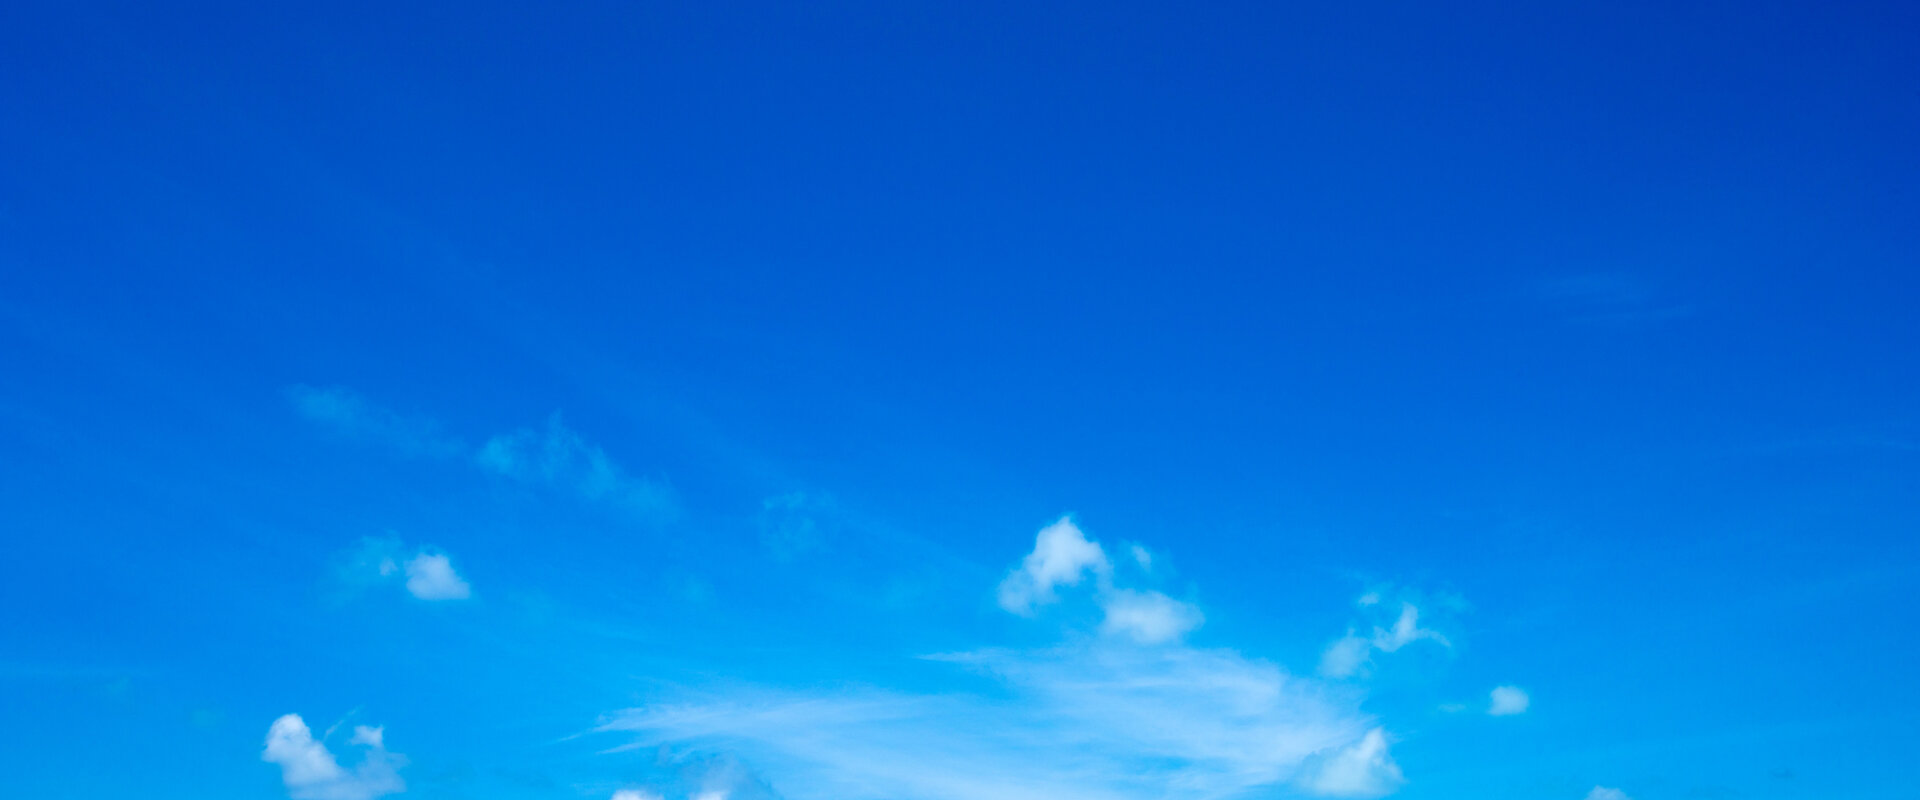 Image of blue sky and clouds.